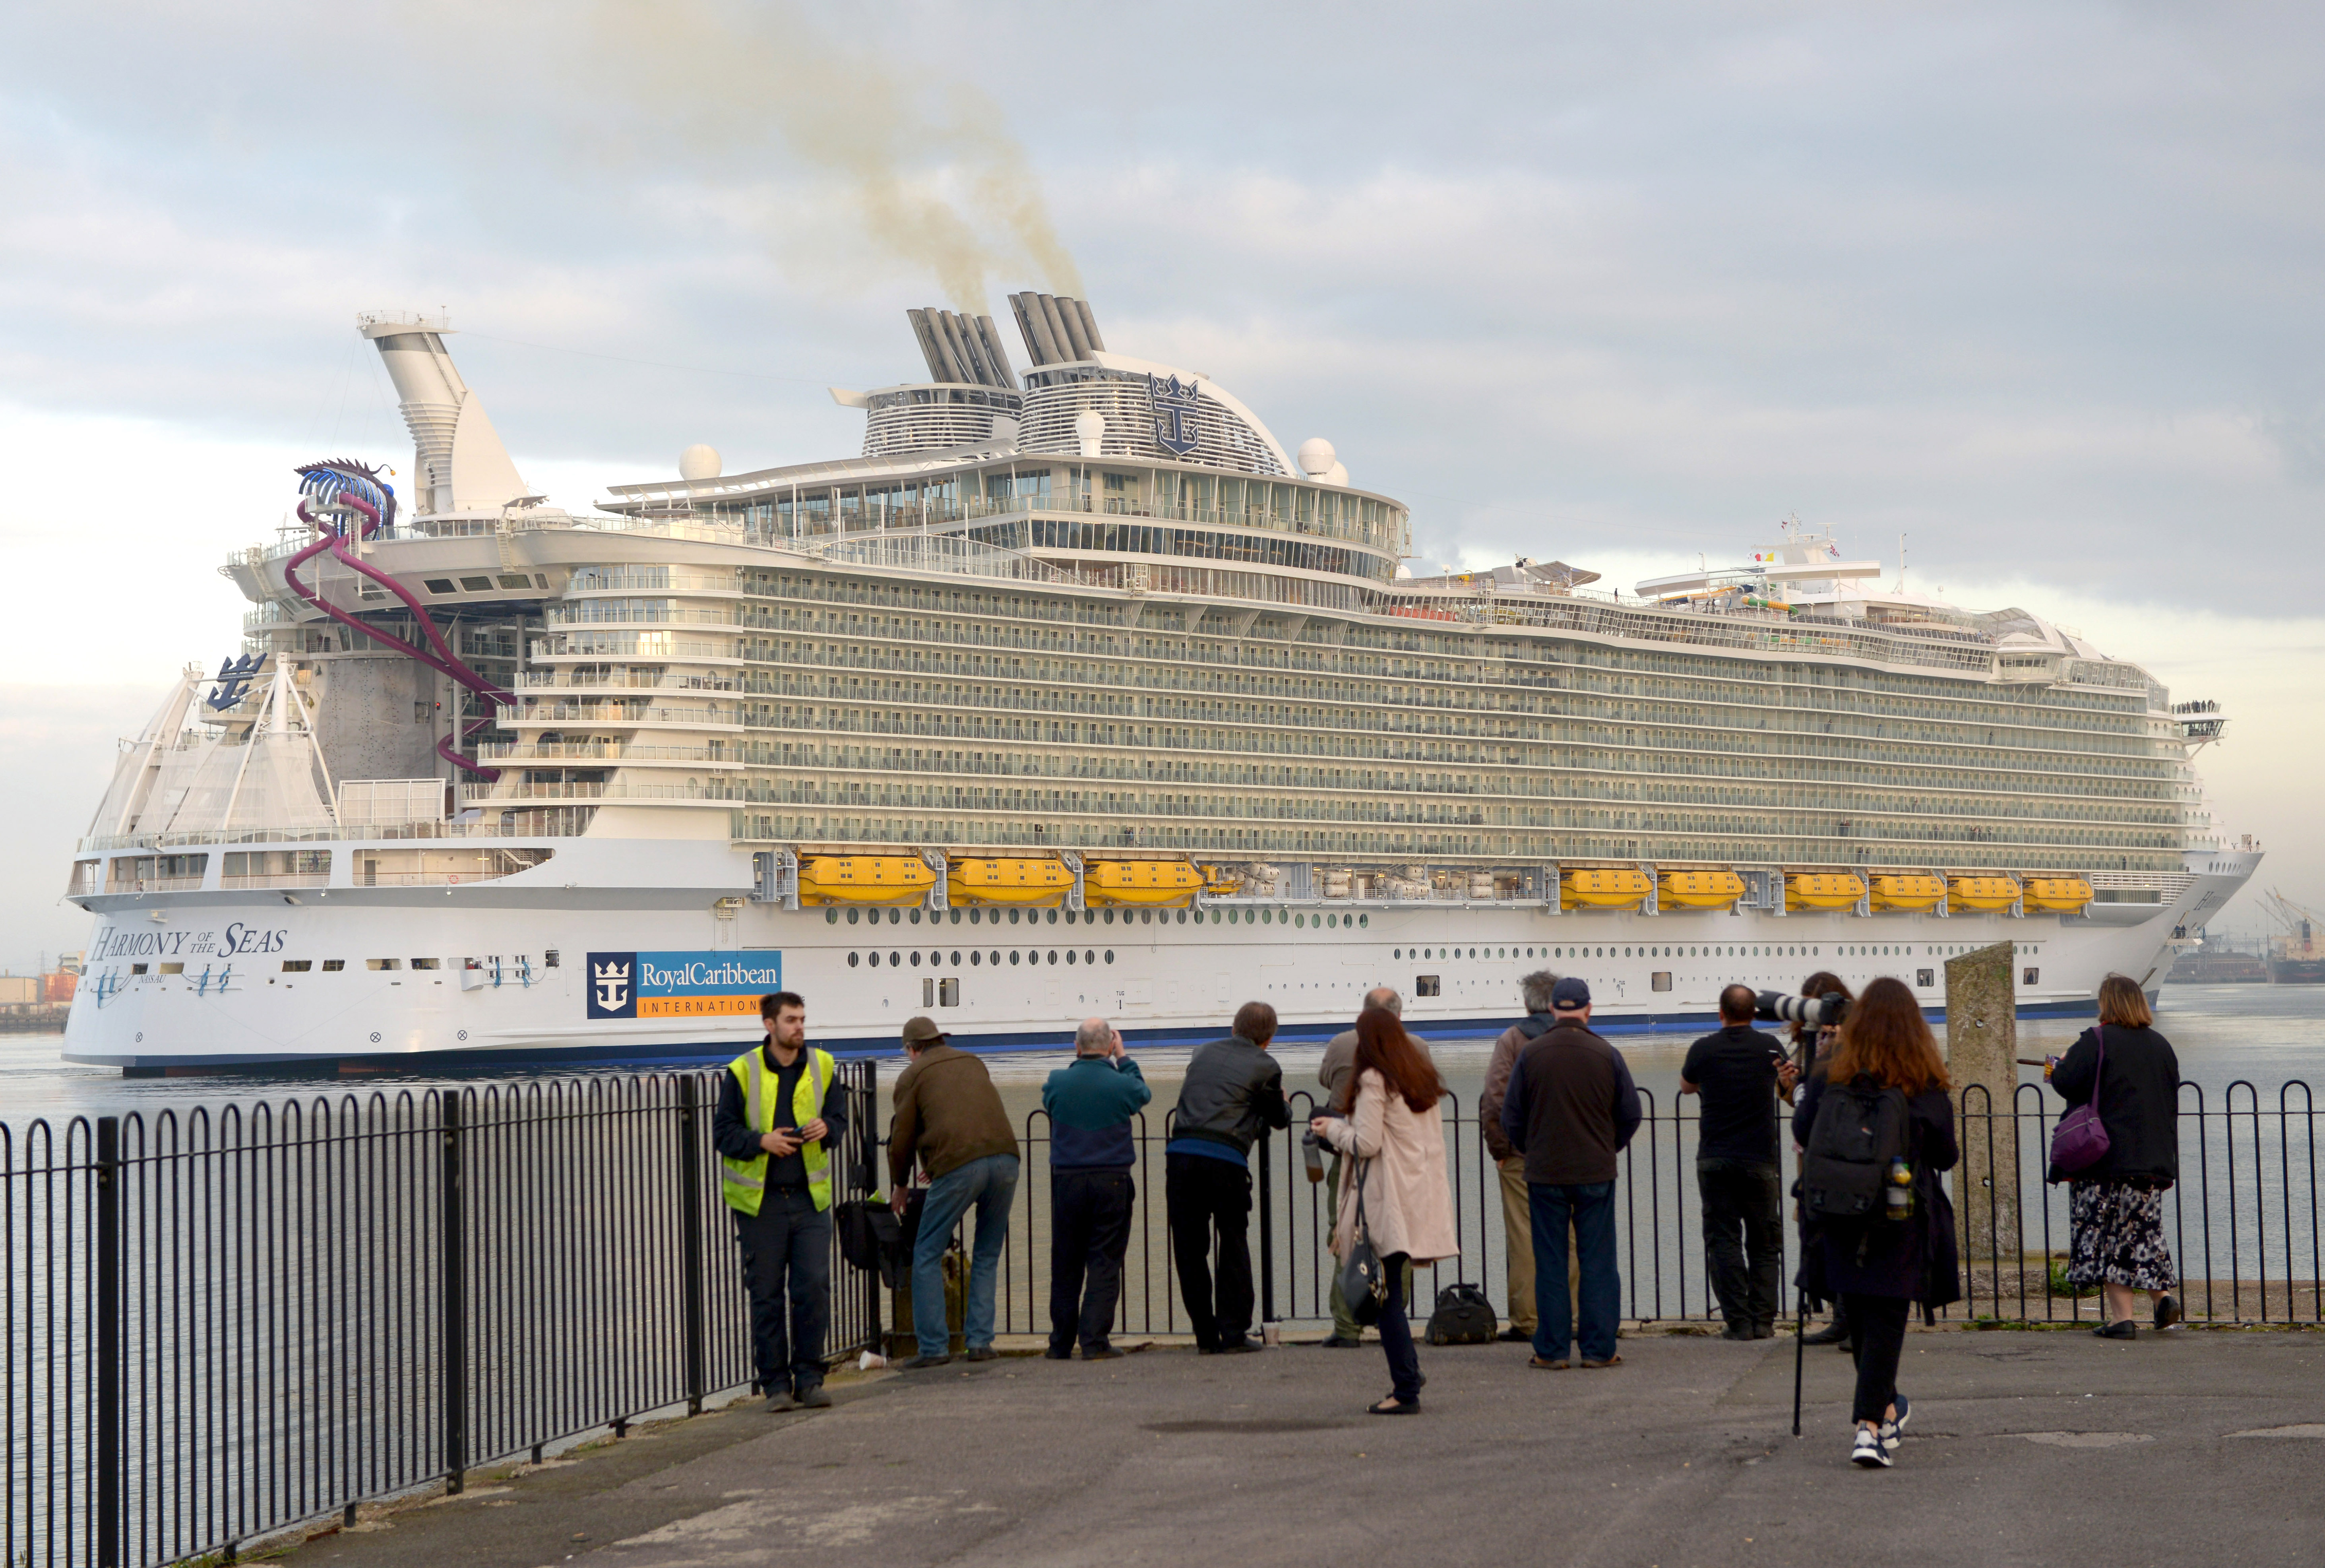 Harmony of the Seas arrives at Port of Southampton